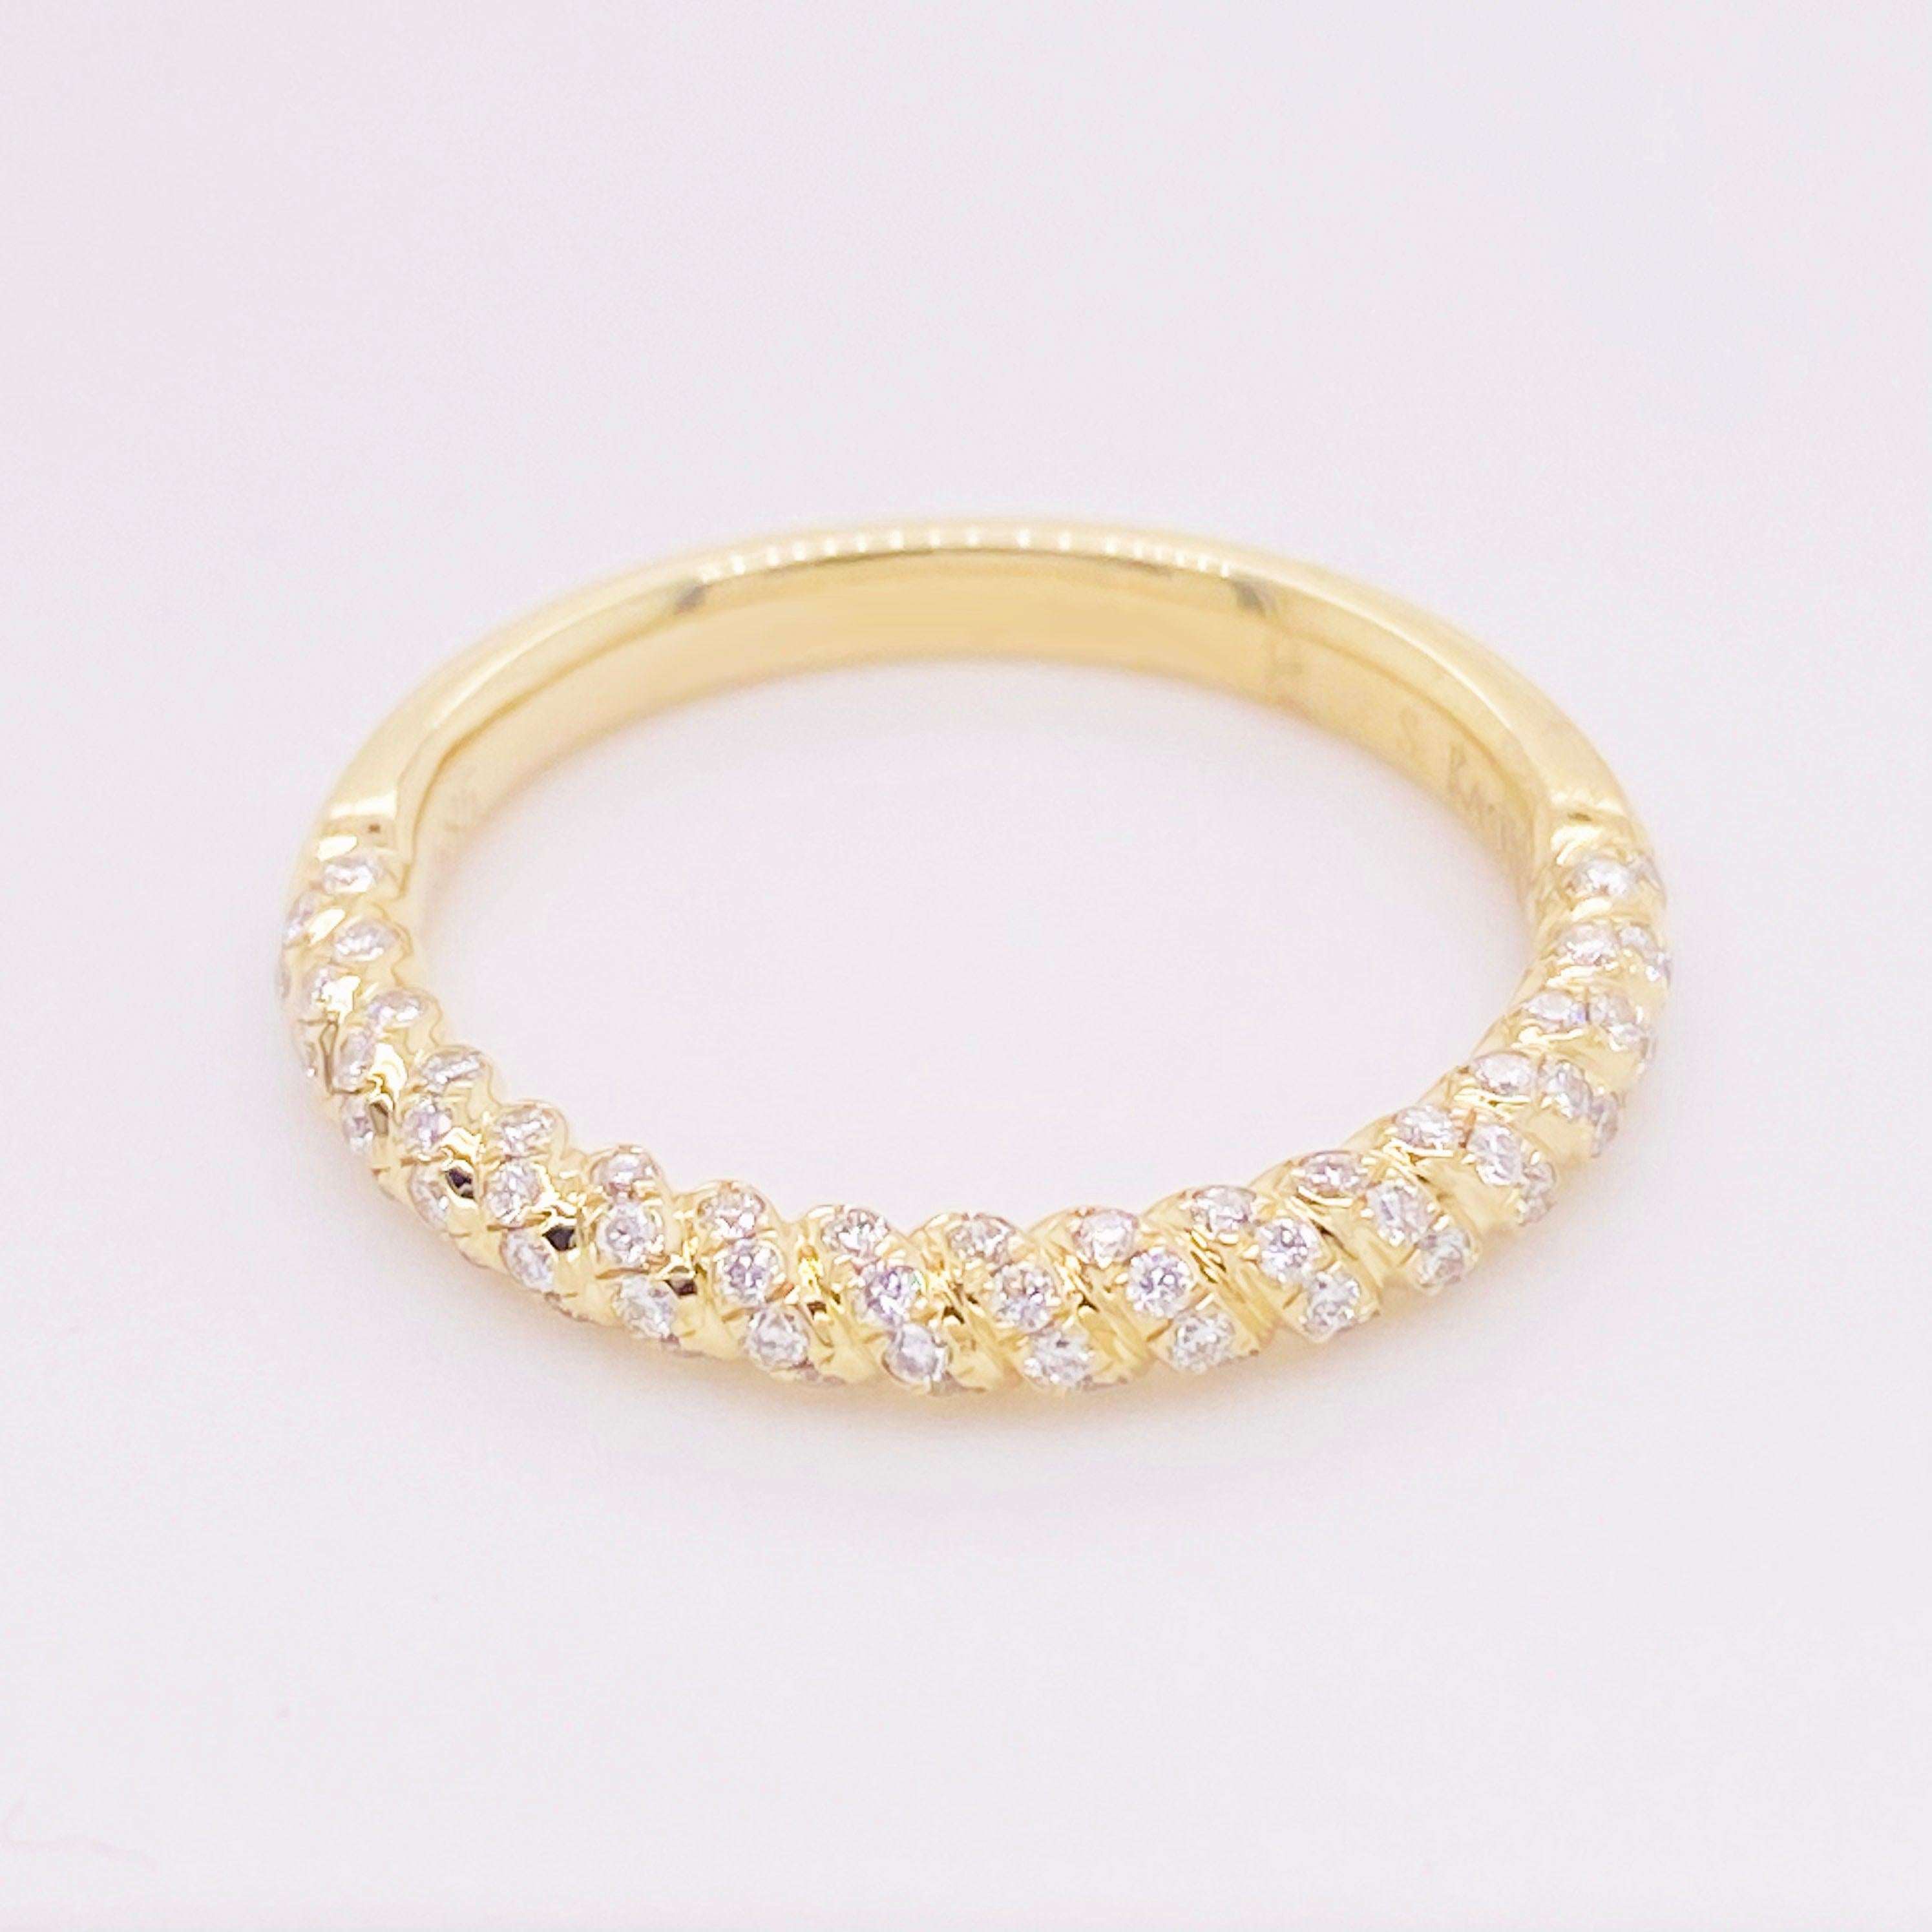 For Sale:  Twisted Diamond Band, 14 Karat Gold, Wedding Band, Twisted Ring, Stackable 3